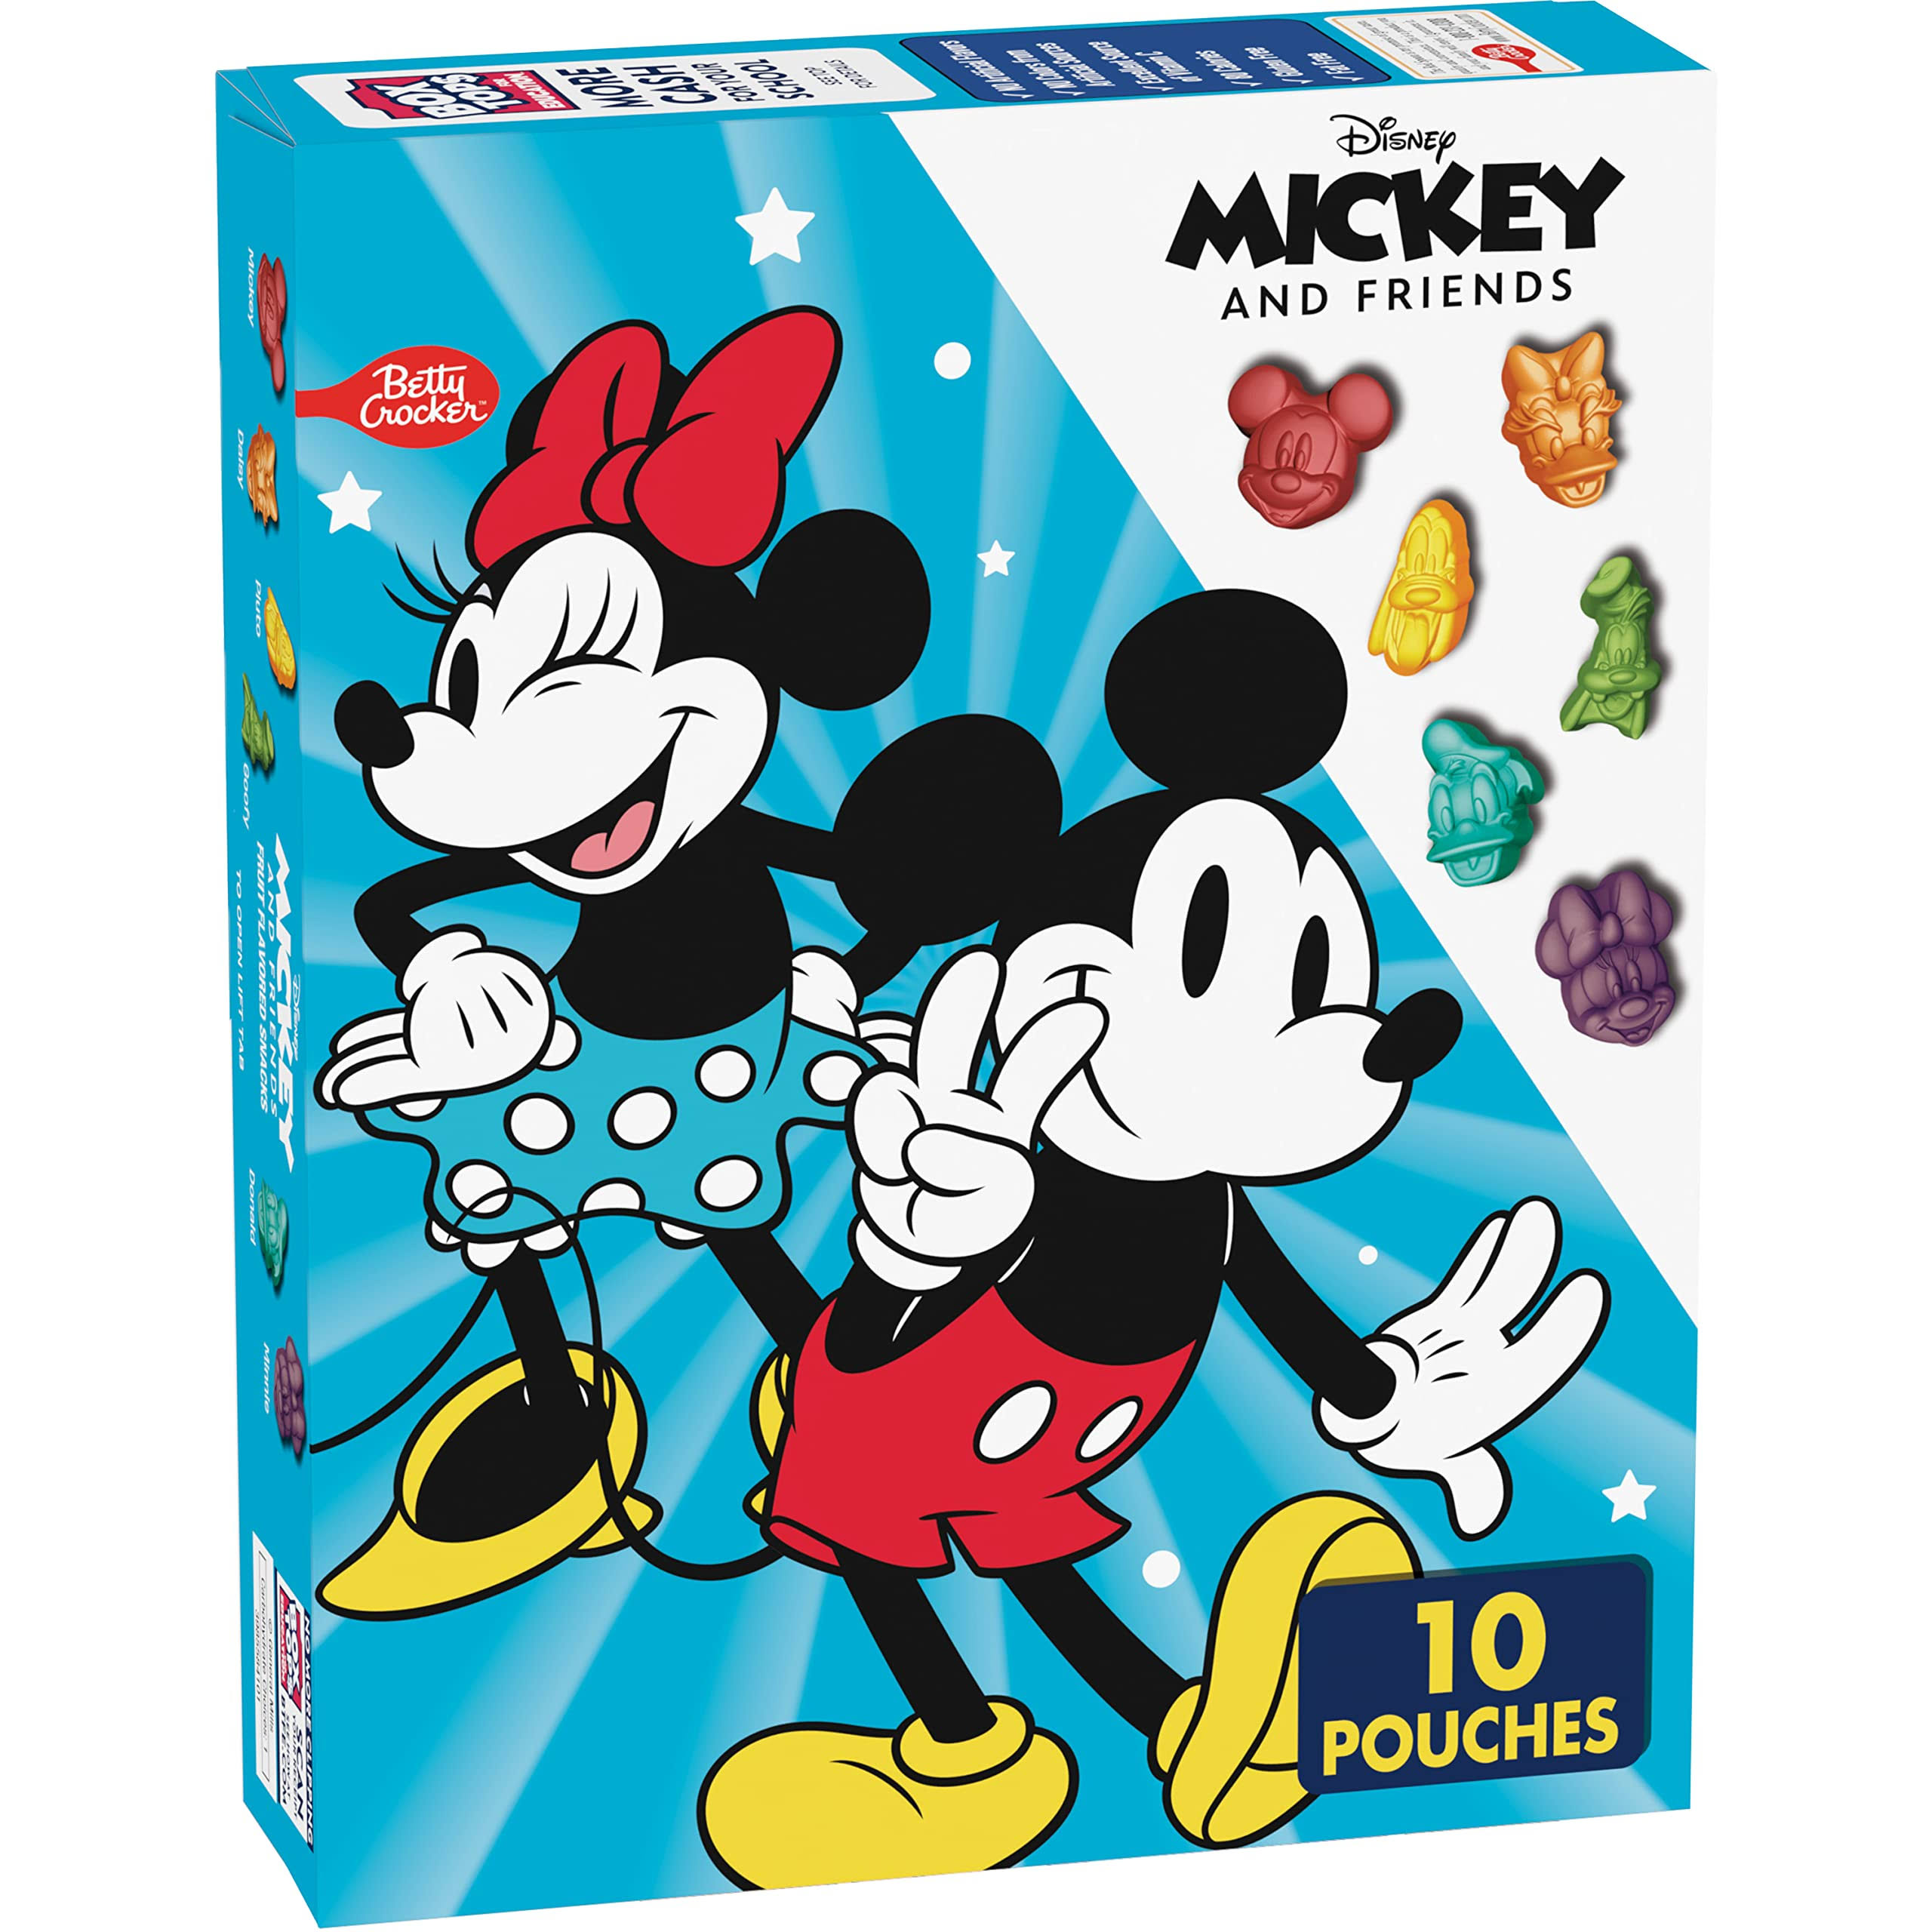 Betty Crocker Fruit Flavored Snacks, Disney Mickey and Friends, Assorted - 10 pack, 0.8 oz pouches